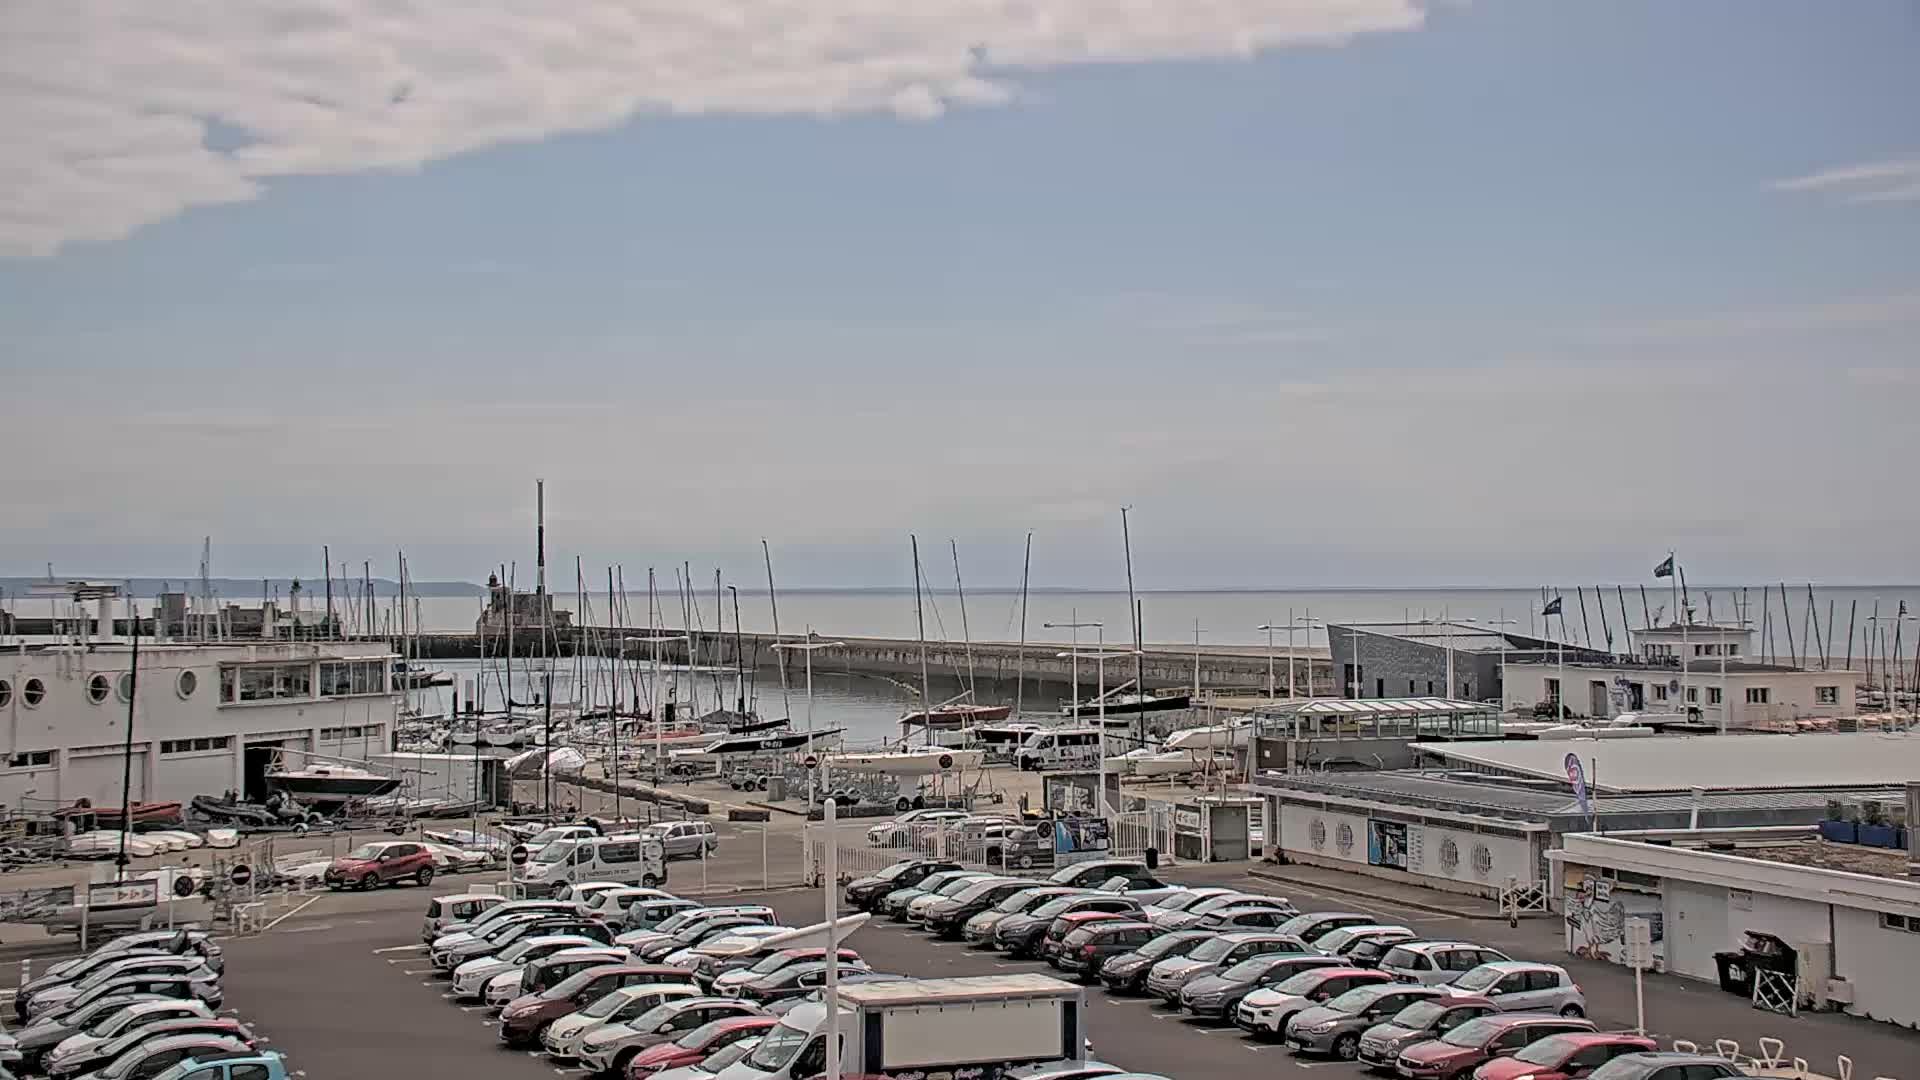 Le Havre Do. 15:34